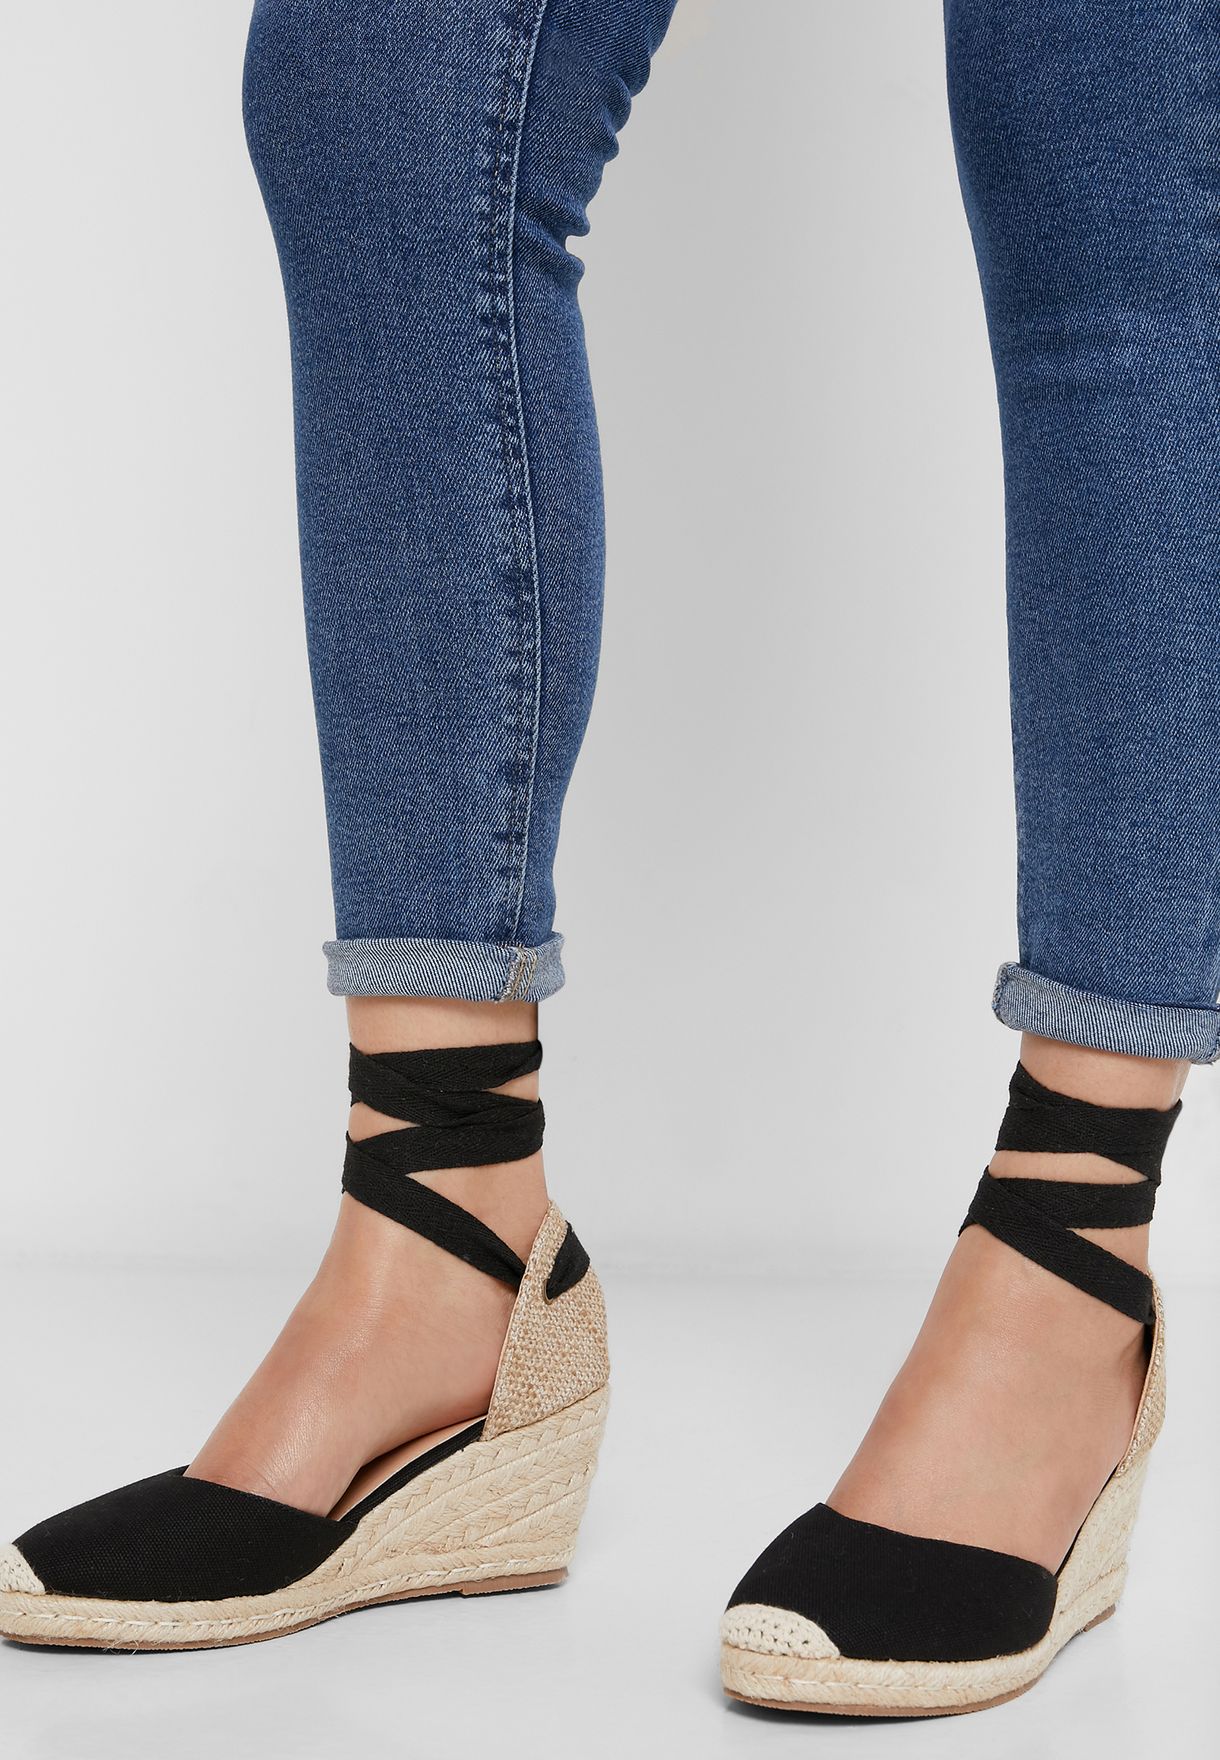 closed toe tie up wedges